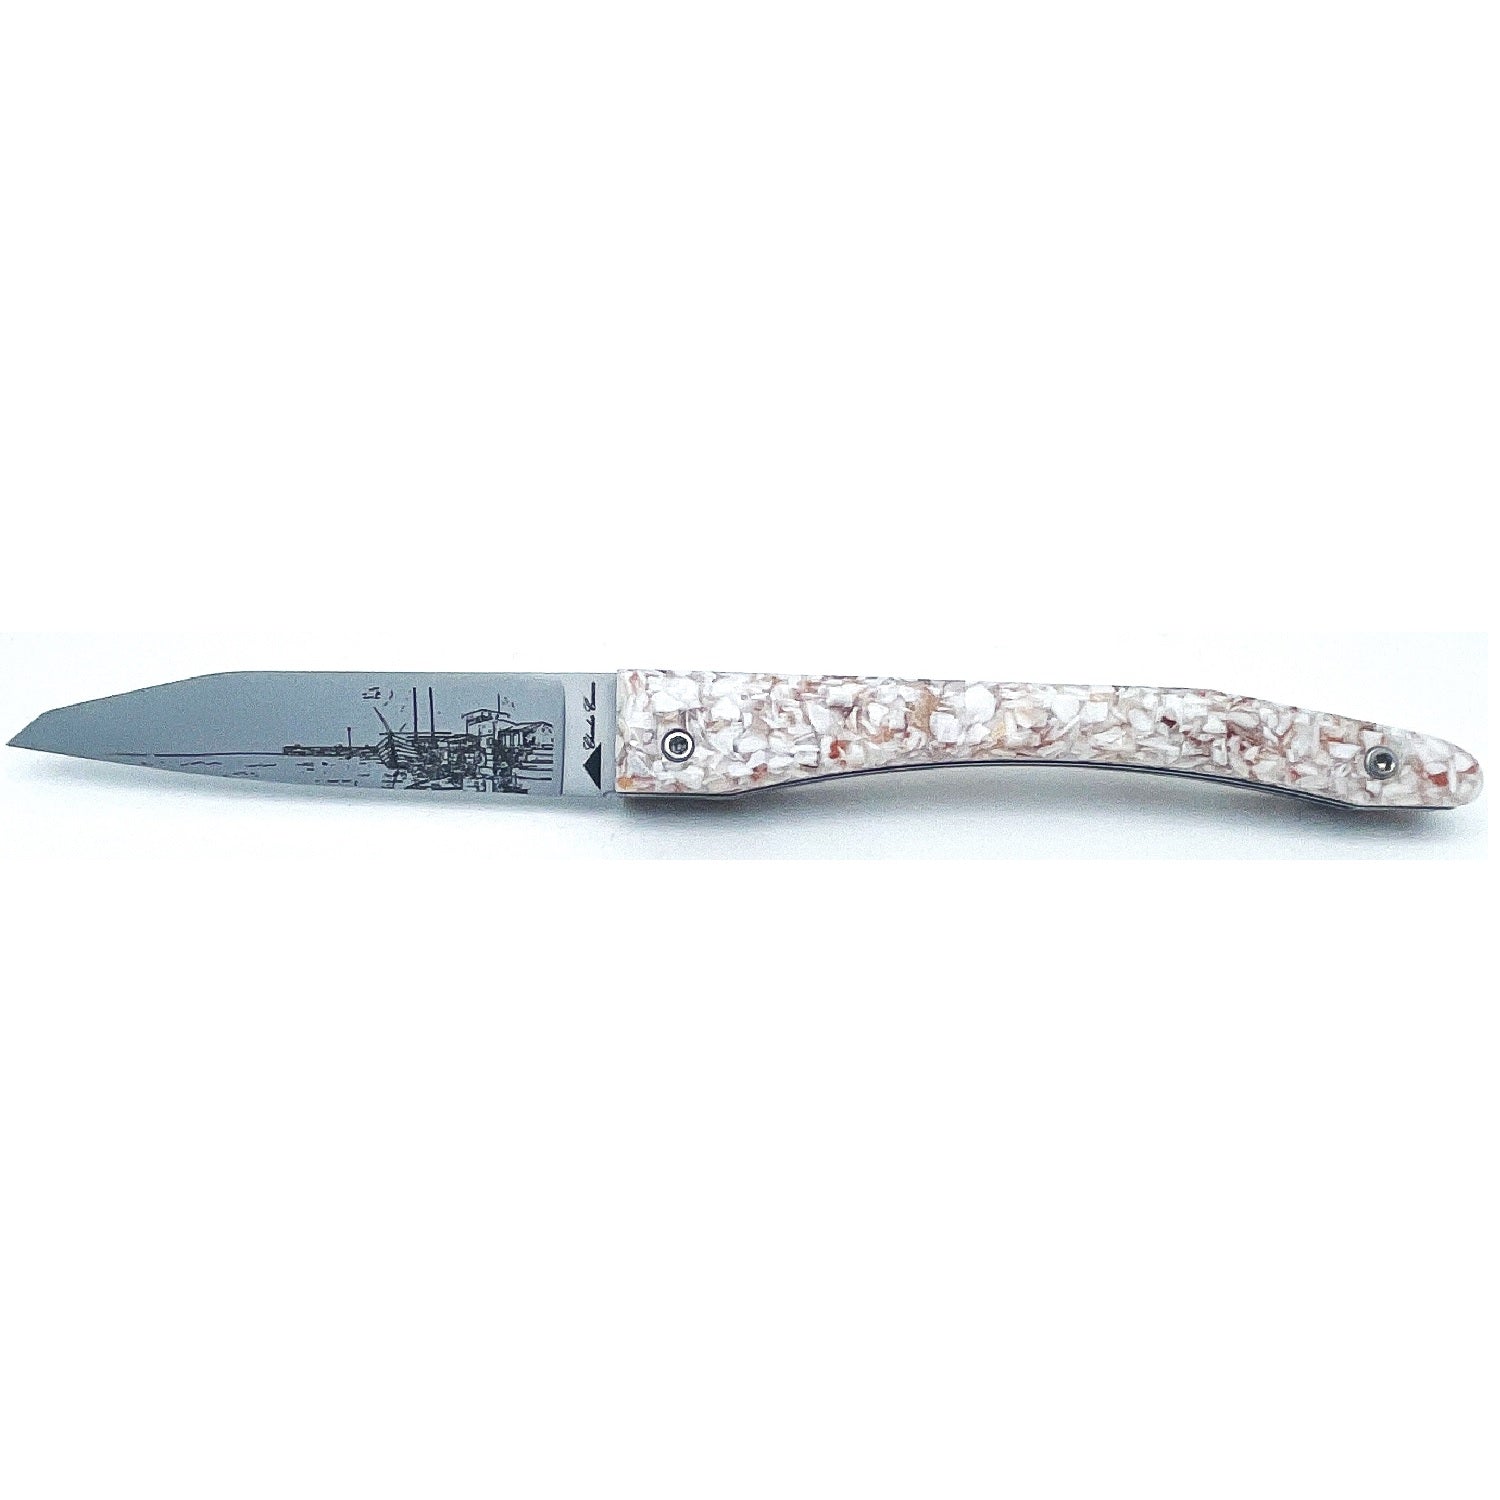 Piedmontese knife with scallop shell handle